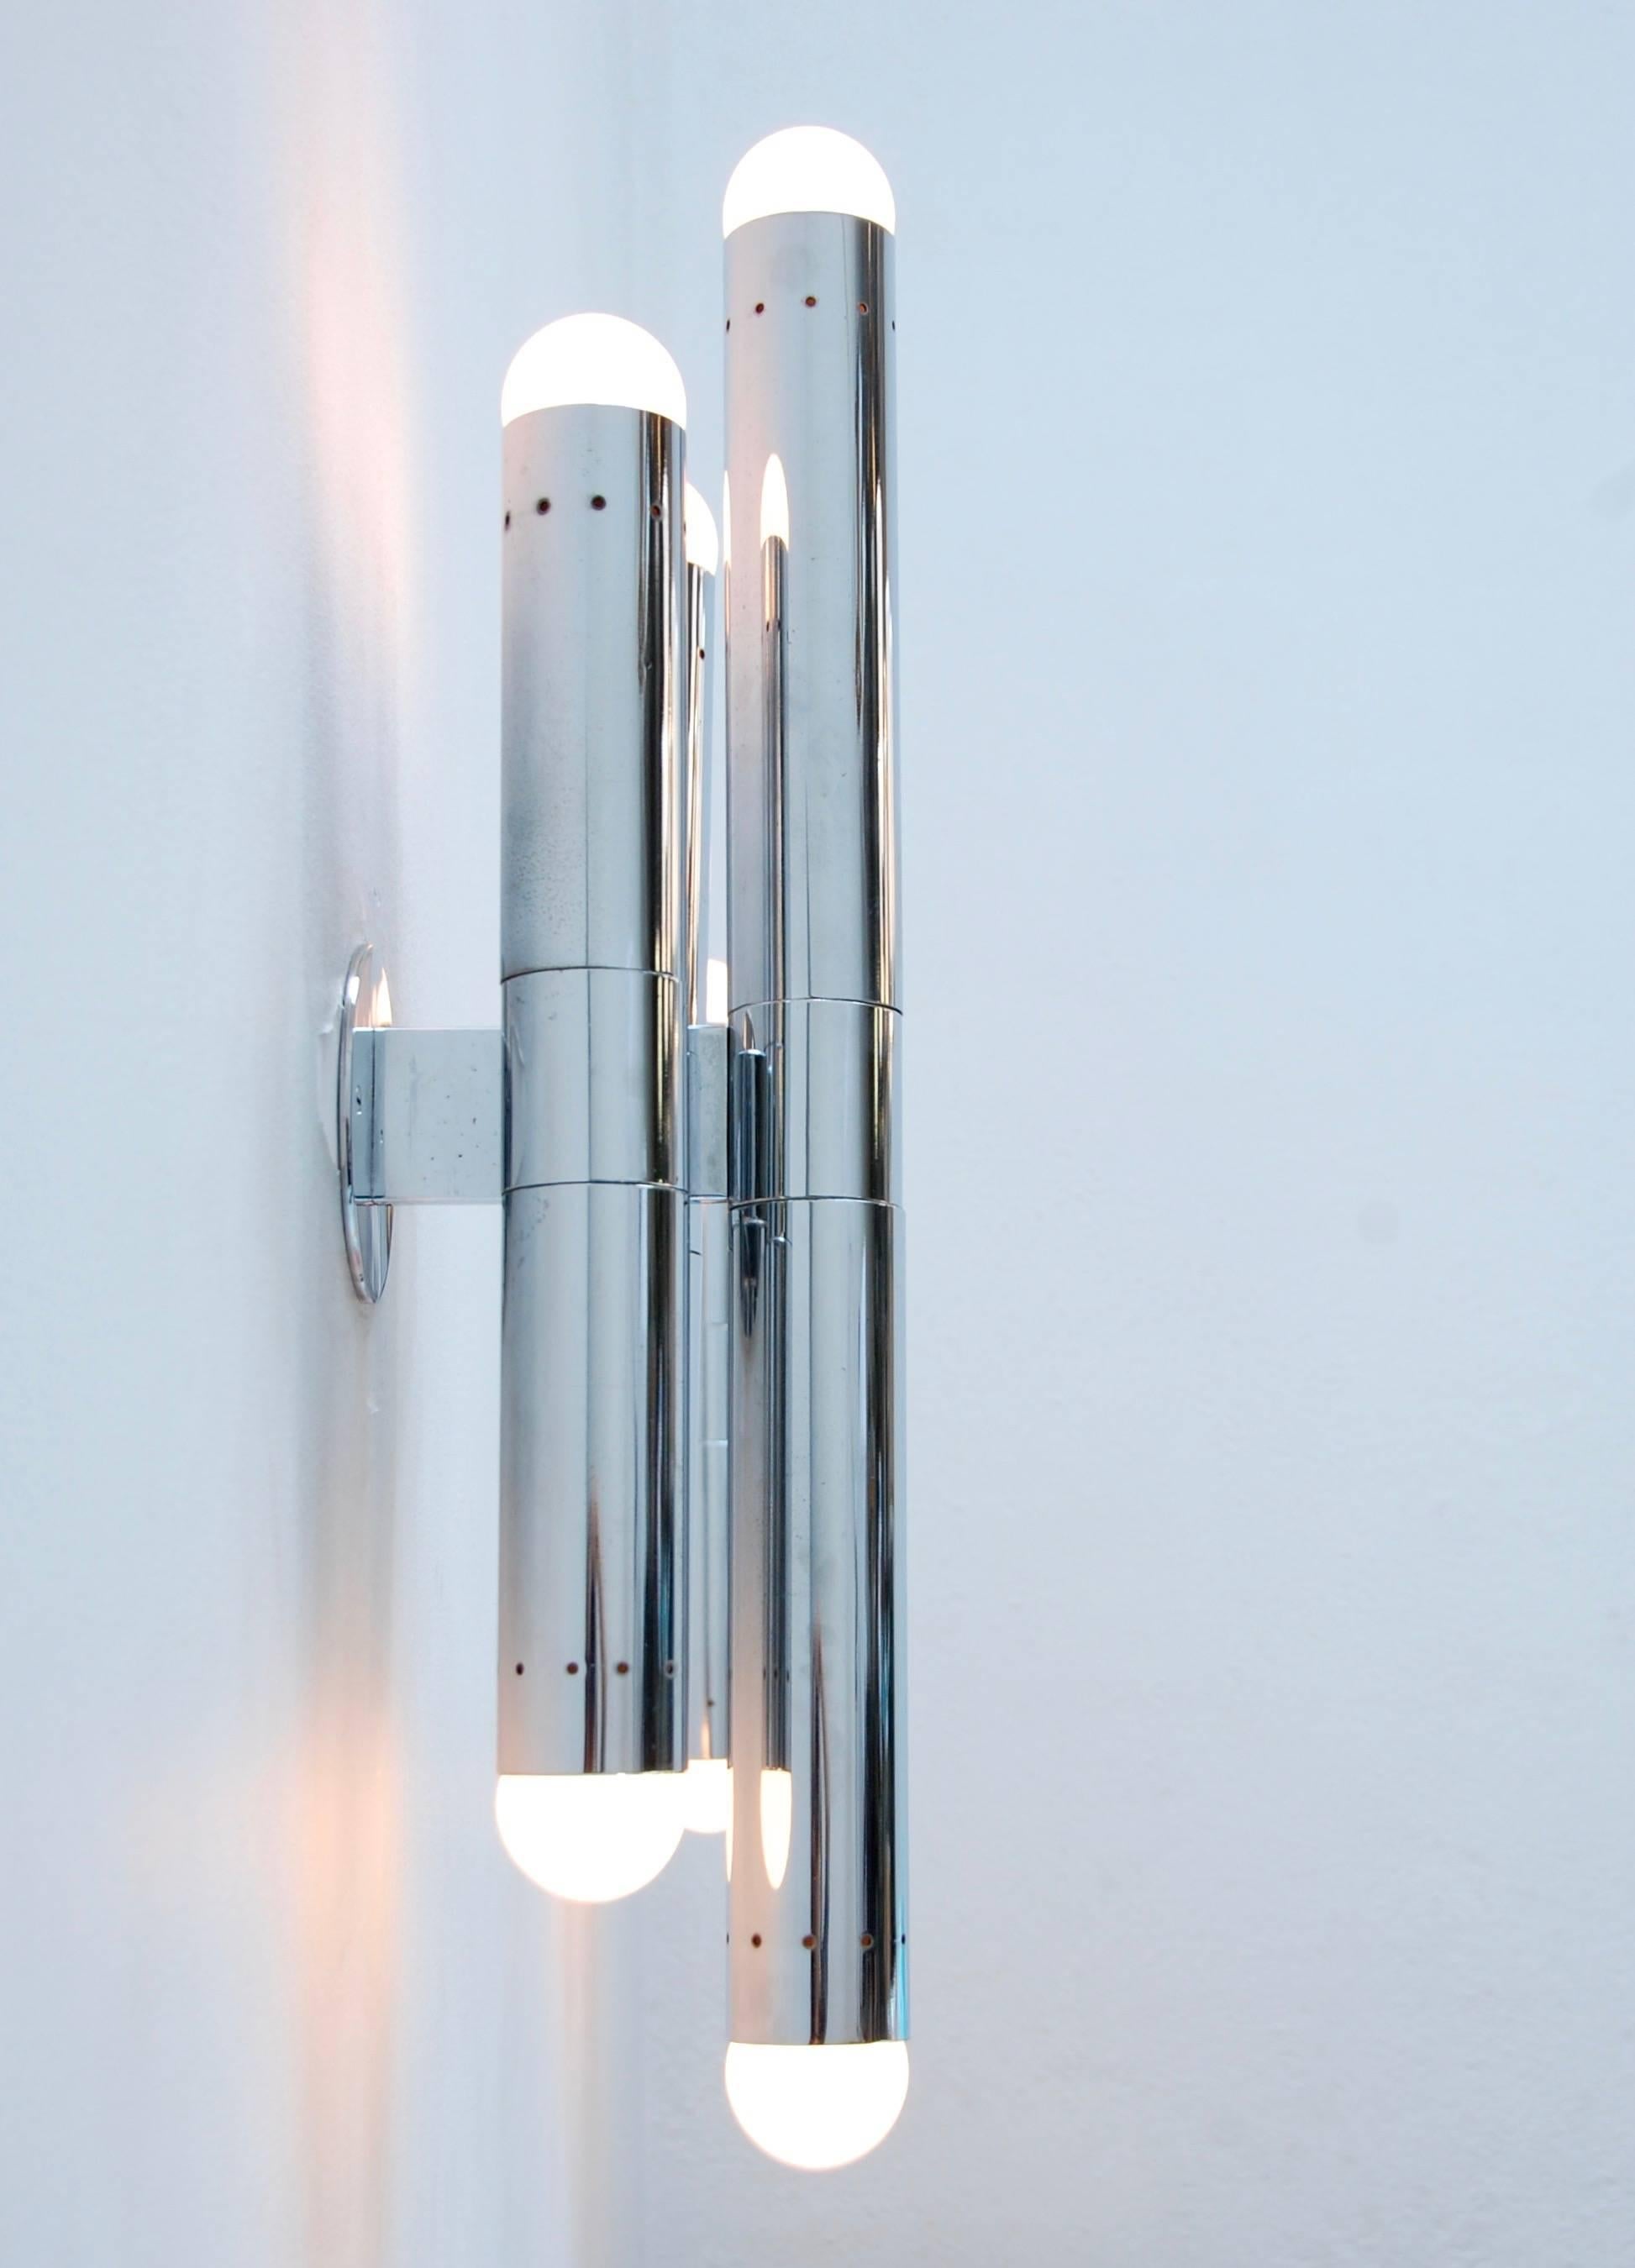 A pair of large fantastic chrome tubular sconces from Italy by Lamperti. Modern 1960s Italian lighting design. Six-E26 light sockets per sconce. Partially restored (rewired) with original finish. Ready to install. 4